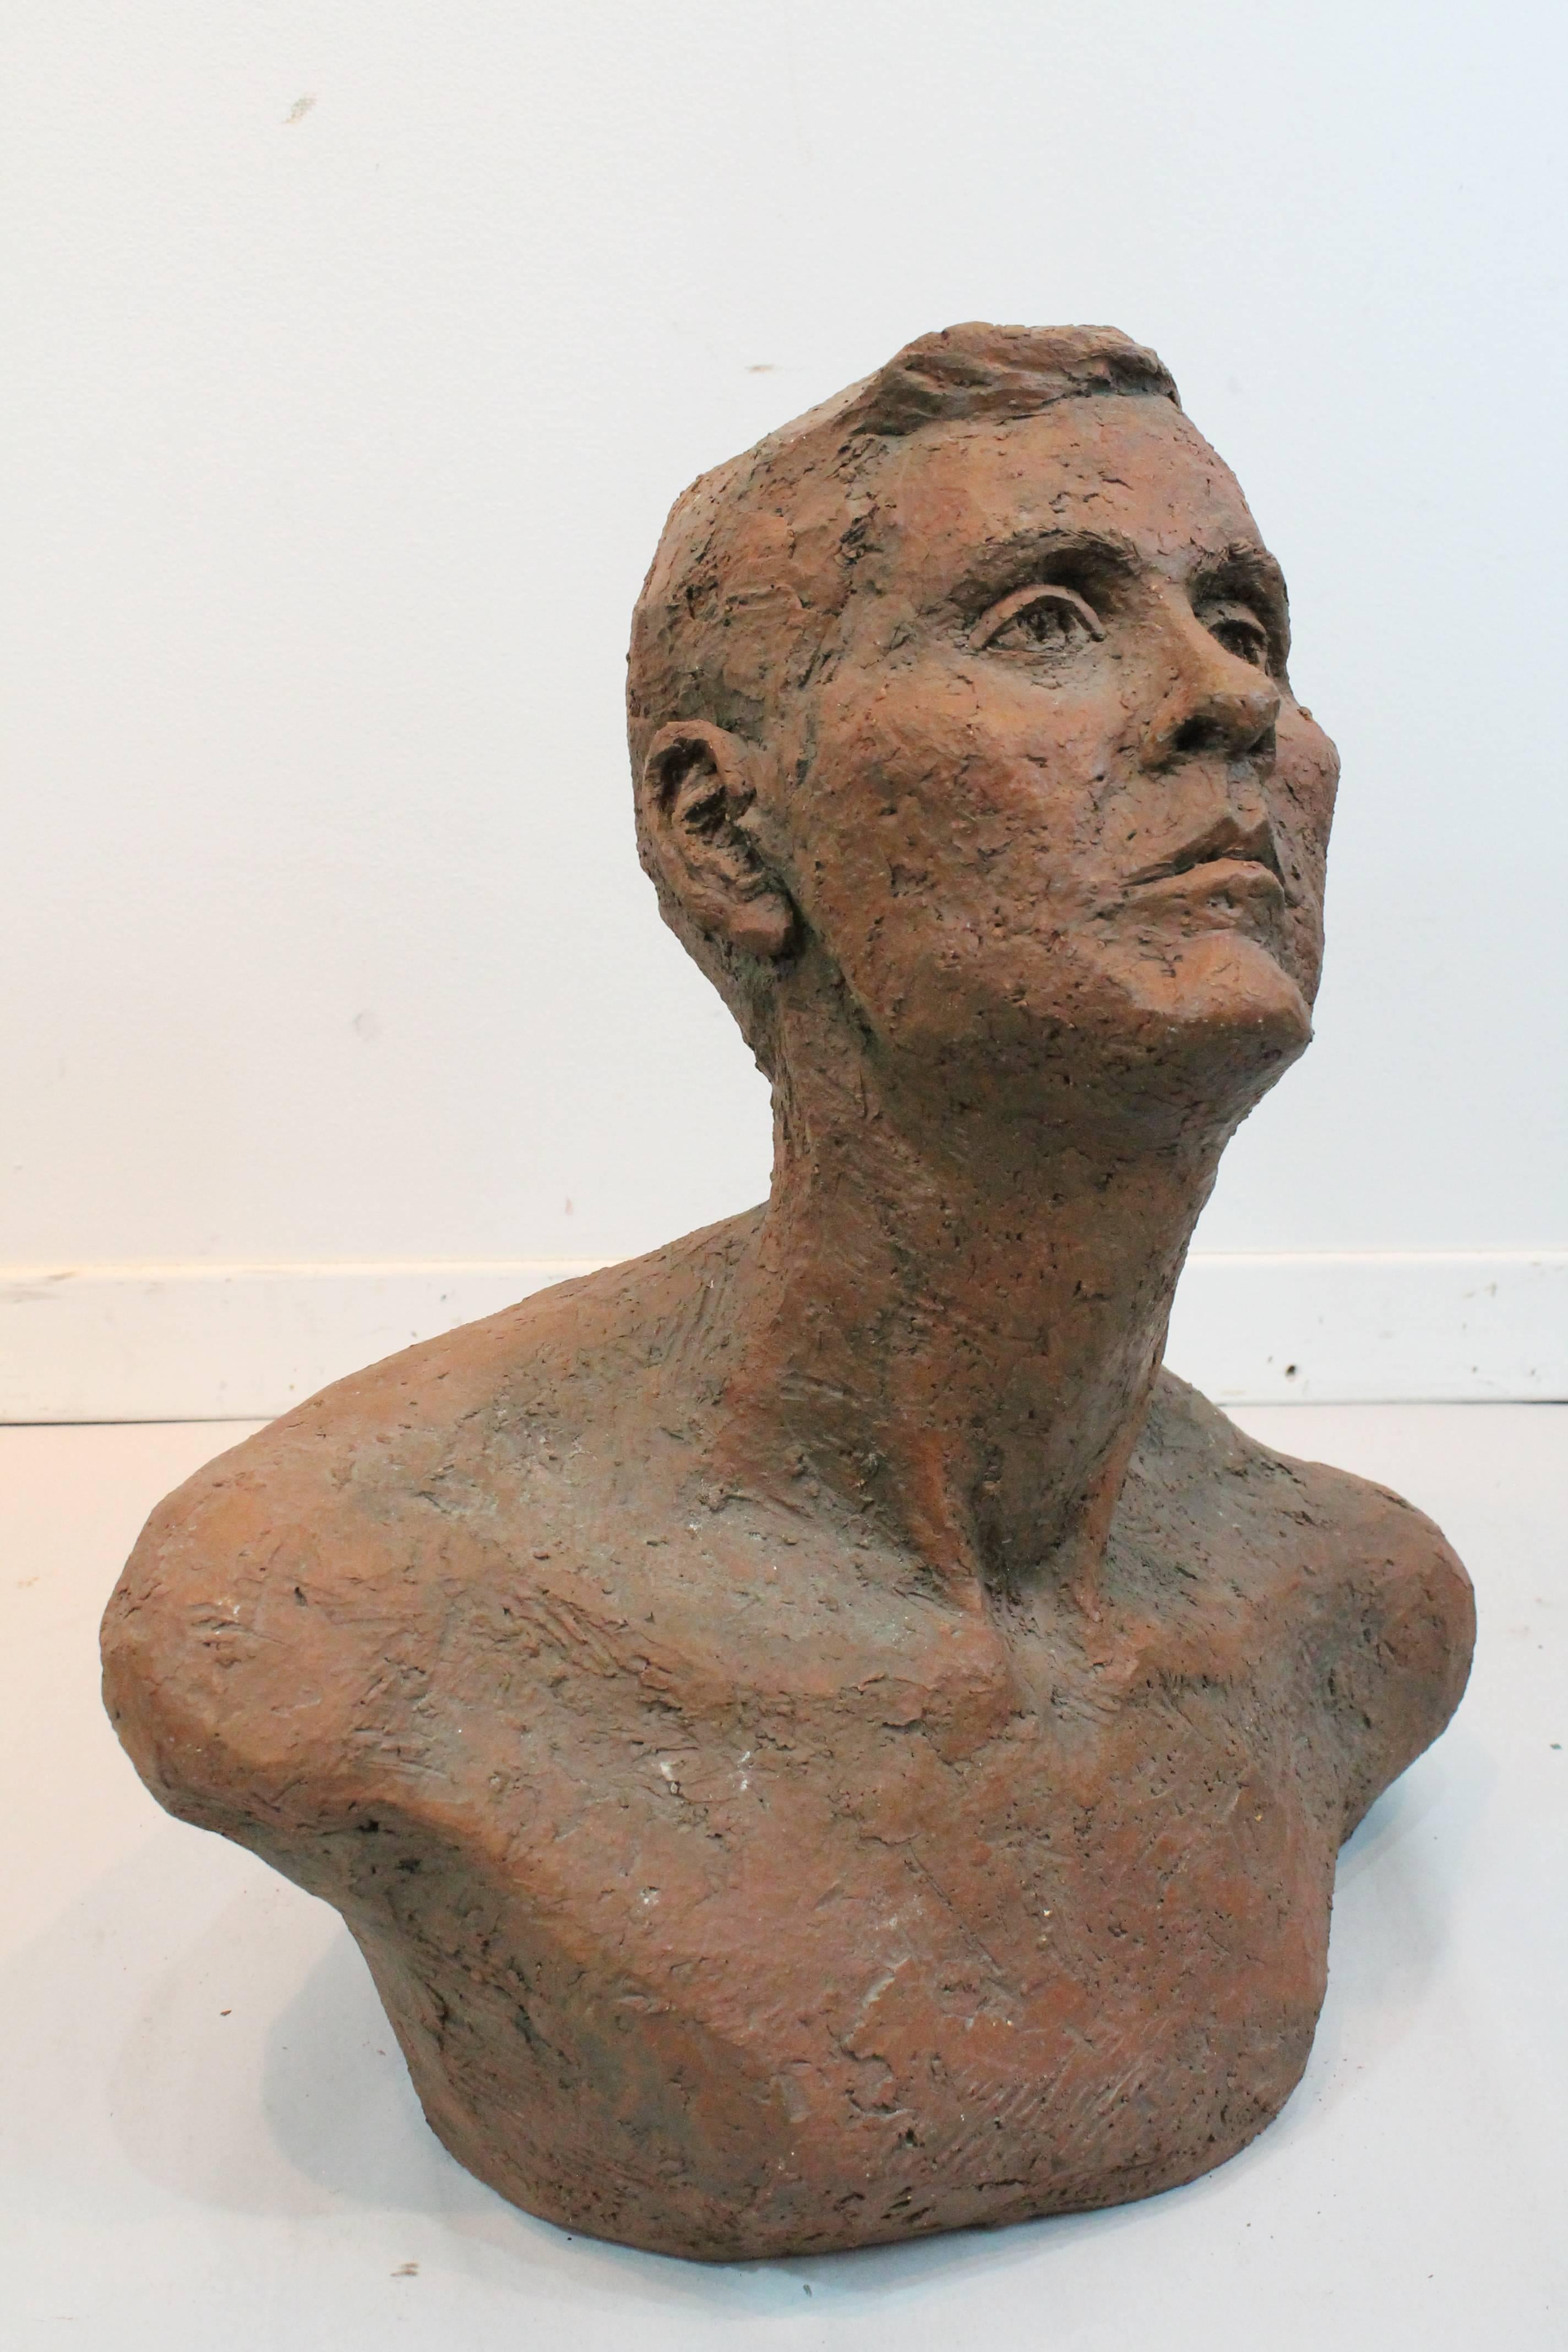 Nice scale and great presence on this terra cotta bust of a gentleman.